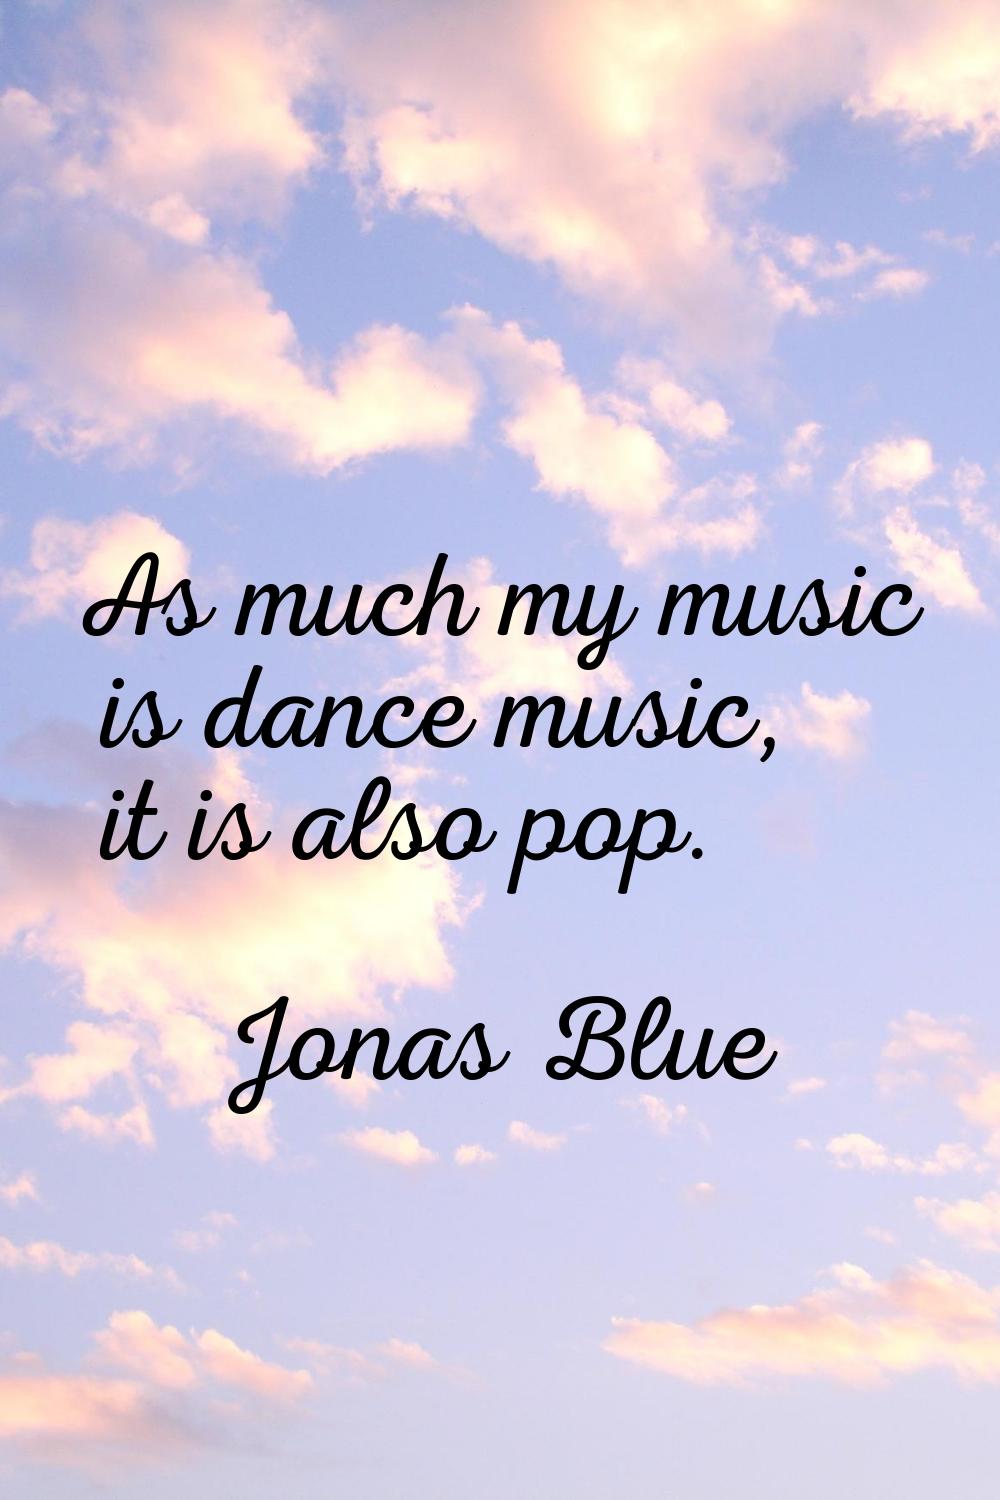 As much my music is dance music, it is also pop.